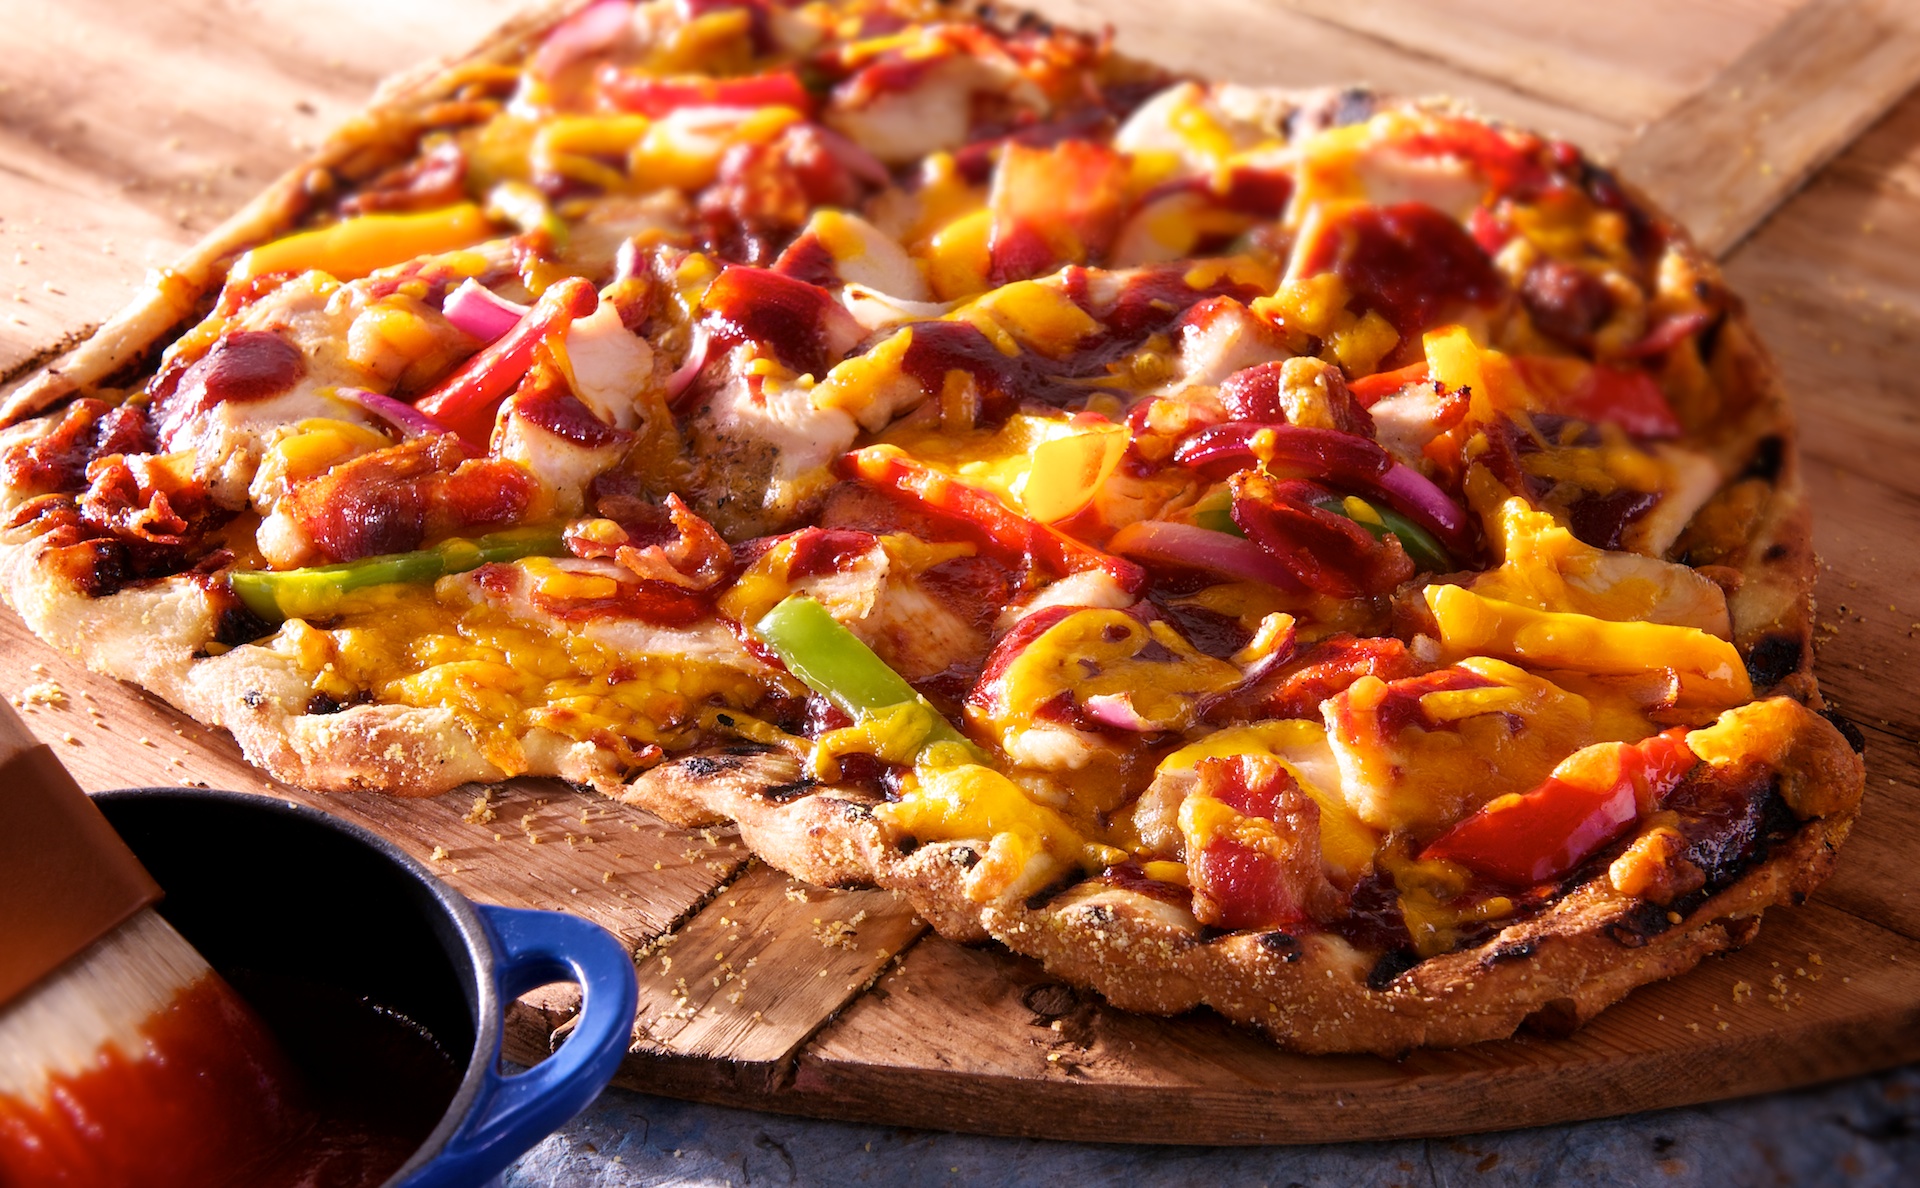 Grilling adds a smoky-sweet flavor to pizza that can’t be duplicated in an oven. For this classic BBQ grilled pizza, we layered smoky char-grilled chicken, bell peppers, red onions, sizzling bacon, barbecue sauce and sharp Cheddar cheese on thin crust pizza dough grilled until golden and bubbly.